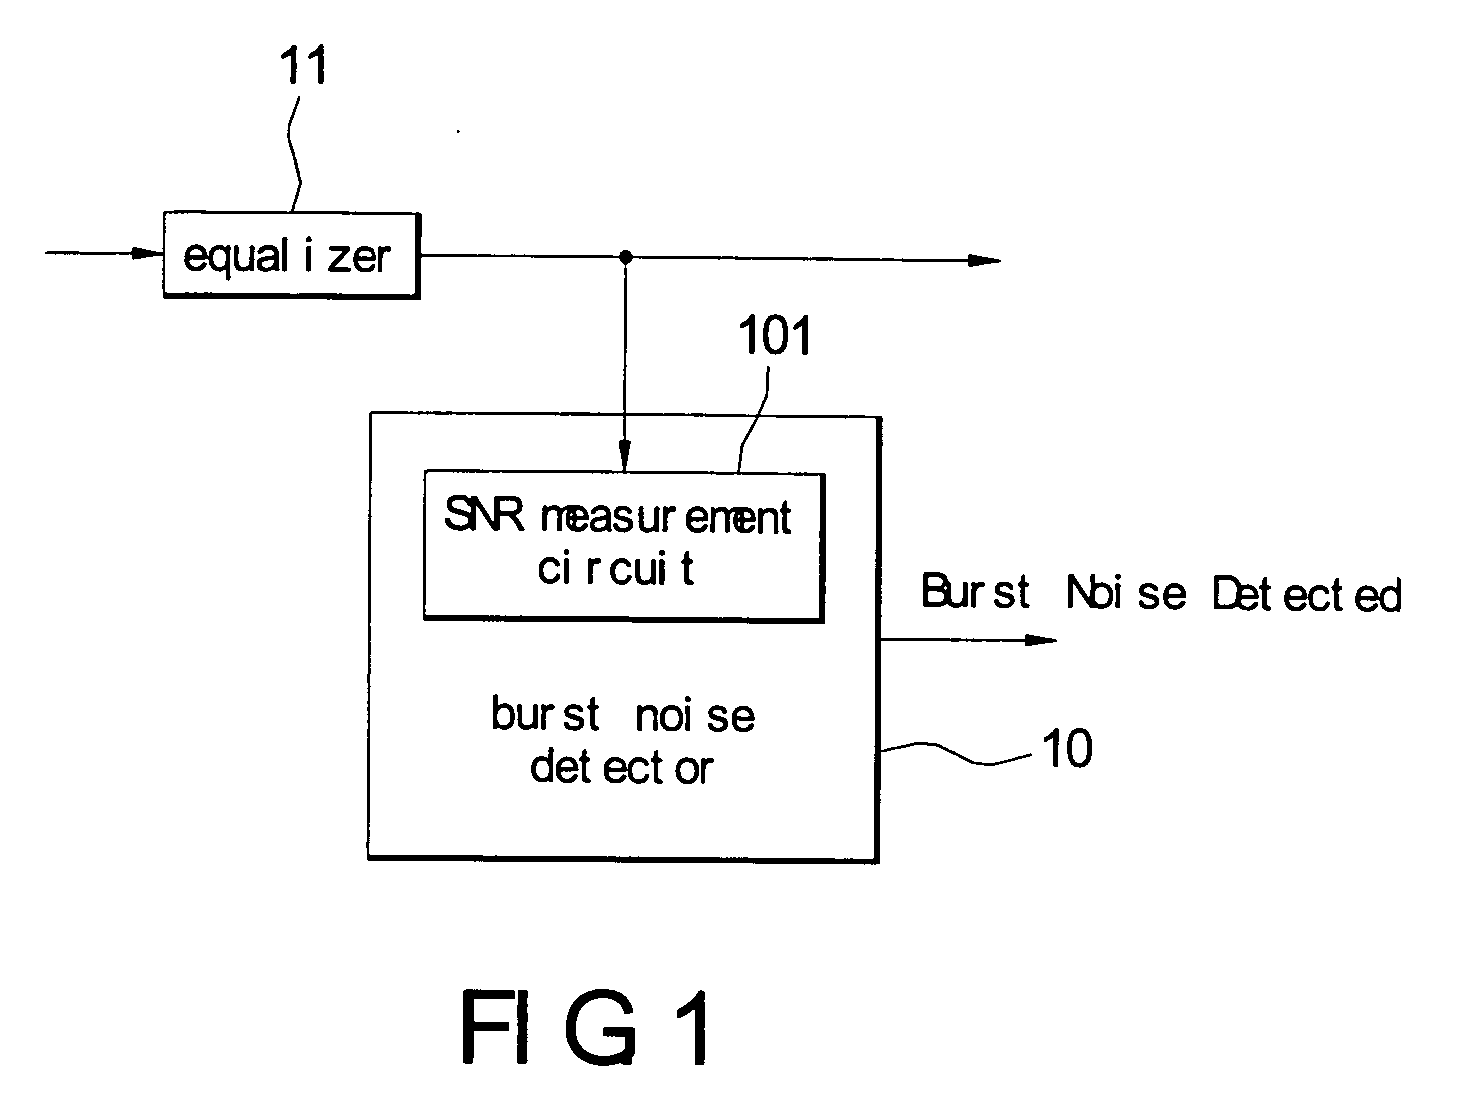 Apparatus for suppressing burst noise and method thereof